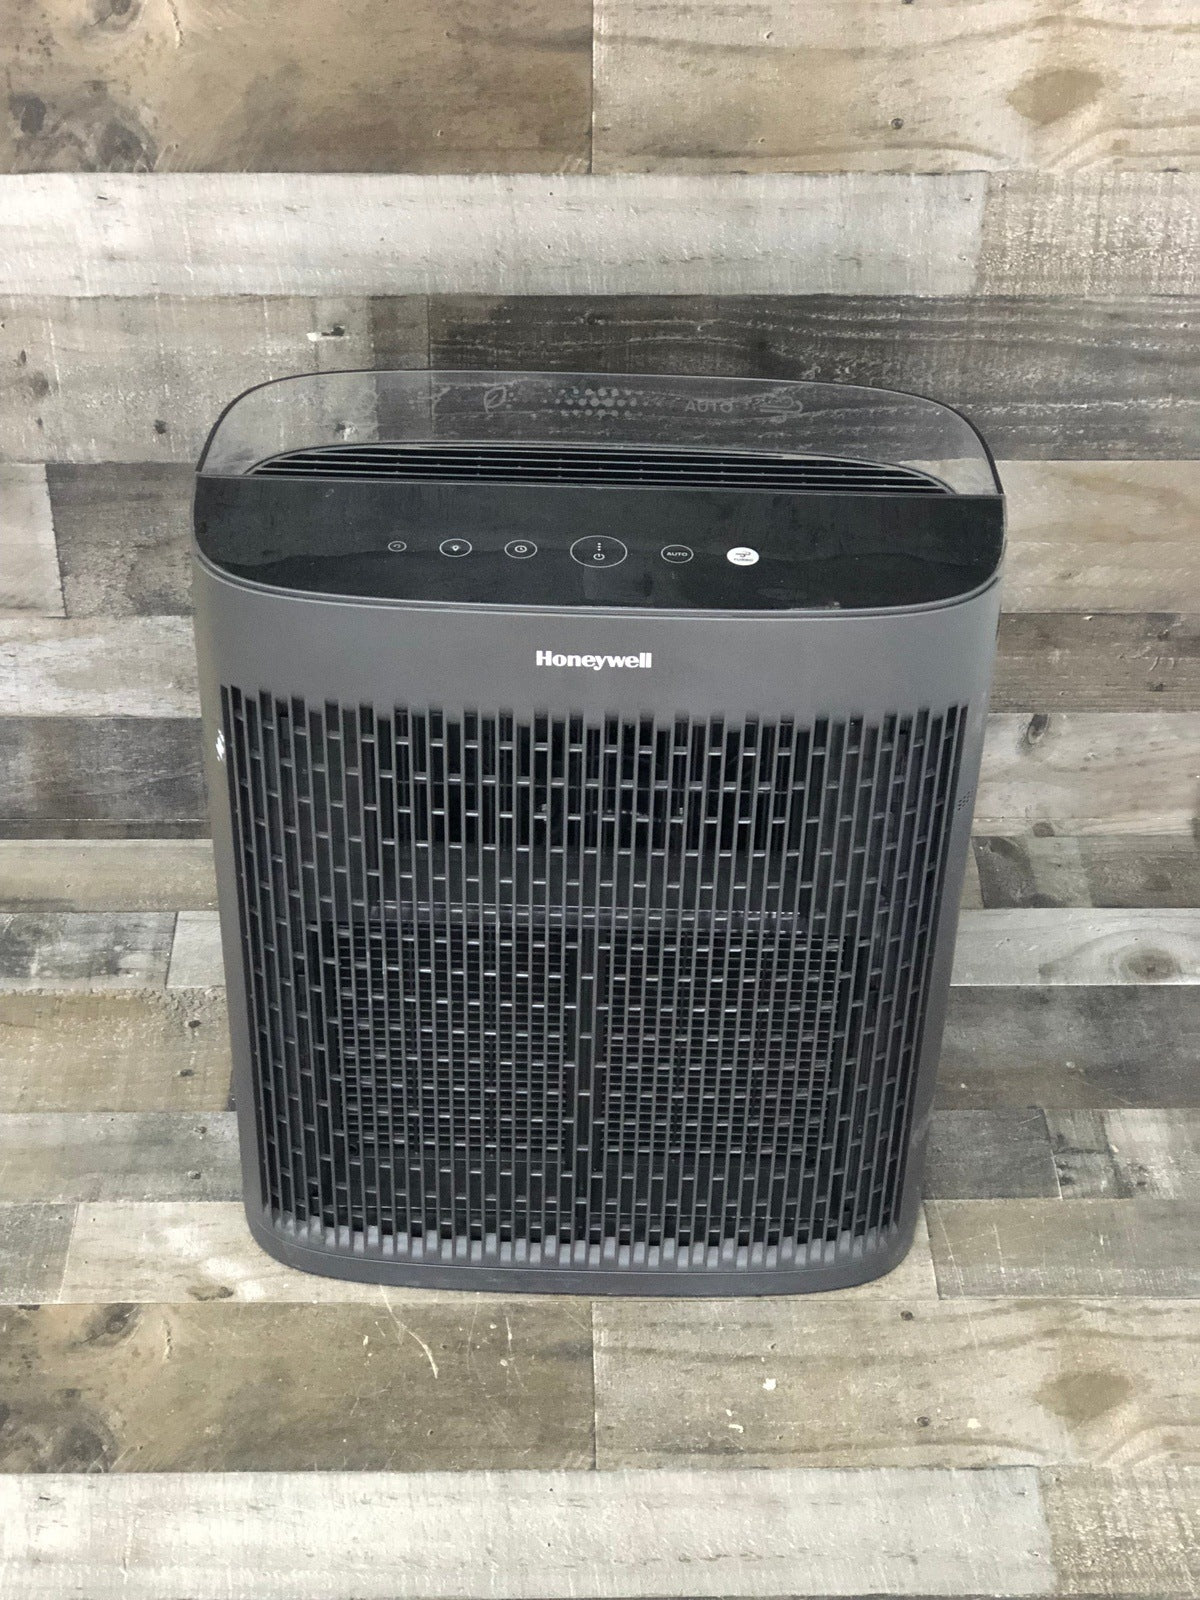 Honeywell InSight HEPA Air Purifier with Air Quality Indicator and Auto Mode, Extra-Large Rooms, Bedrooms, Home (500 sq ft), Black - Reduces Airborne Allergens, Smoke, Dust, Pollen, HPA5300B